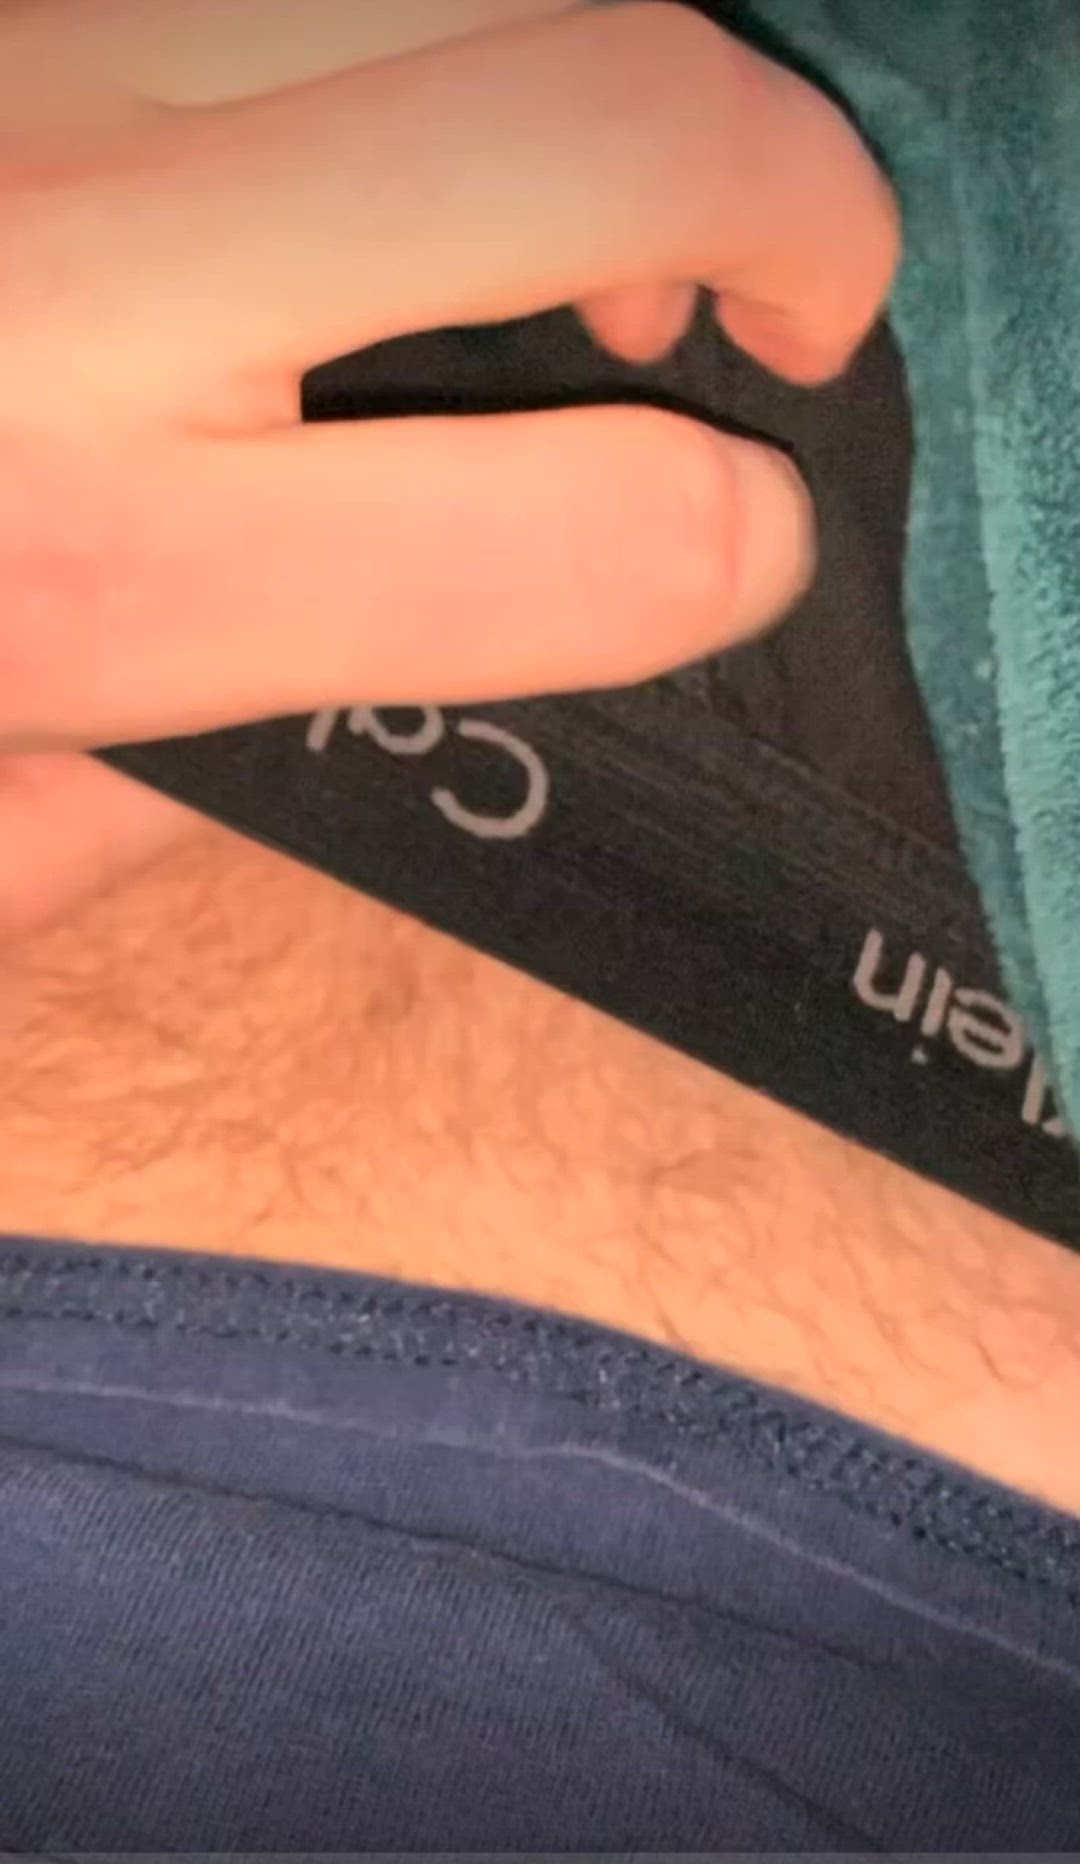 Big Dick porn video with onlyfans model Wild <strong>@perpetualorgasm</strong>